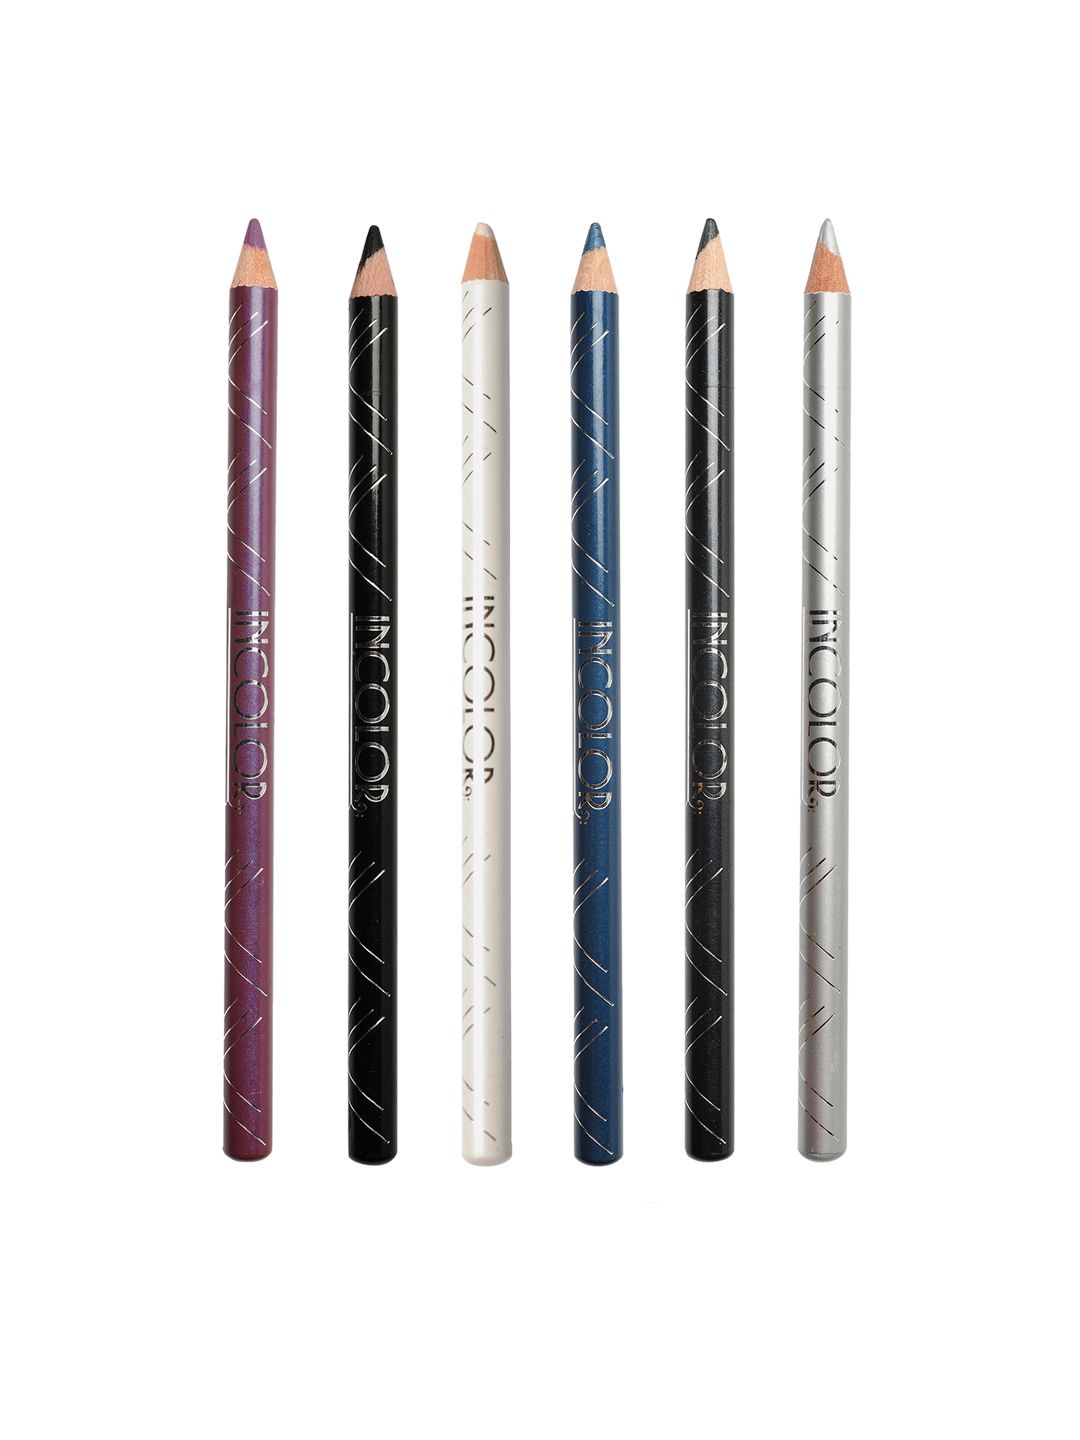 INCOLOR Pack Of 6 Intense Longwear Eye Pencils Price in India